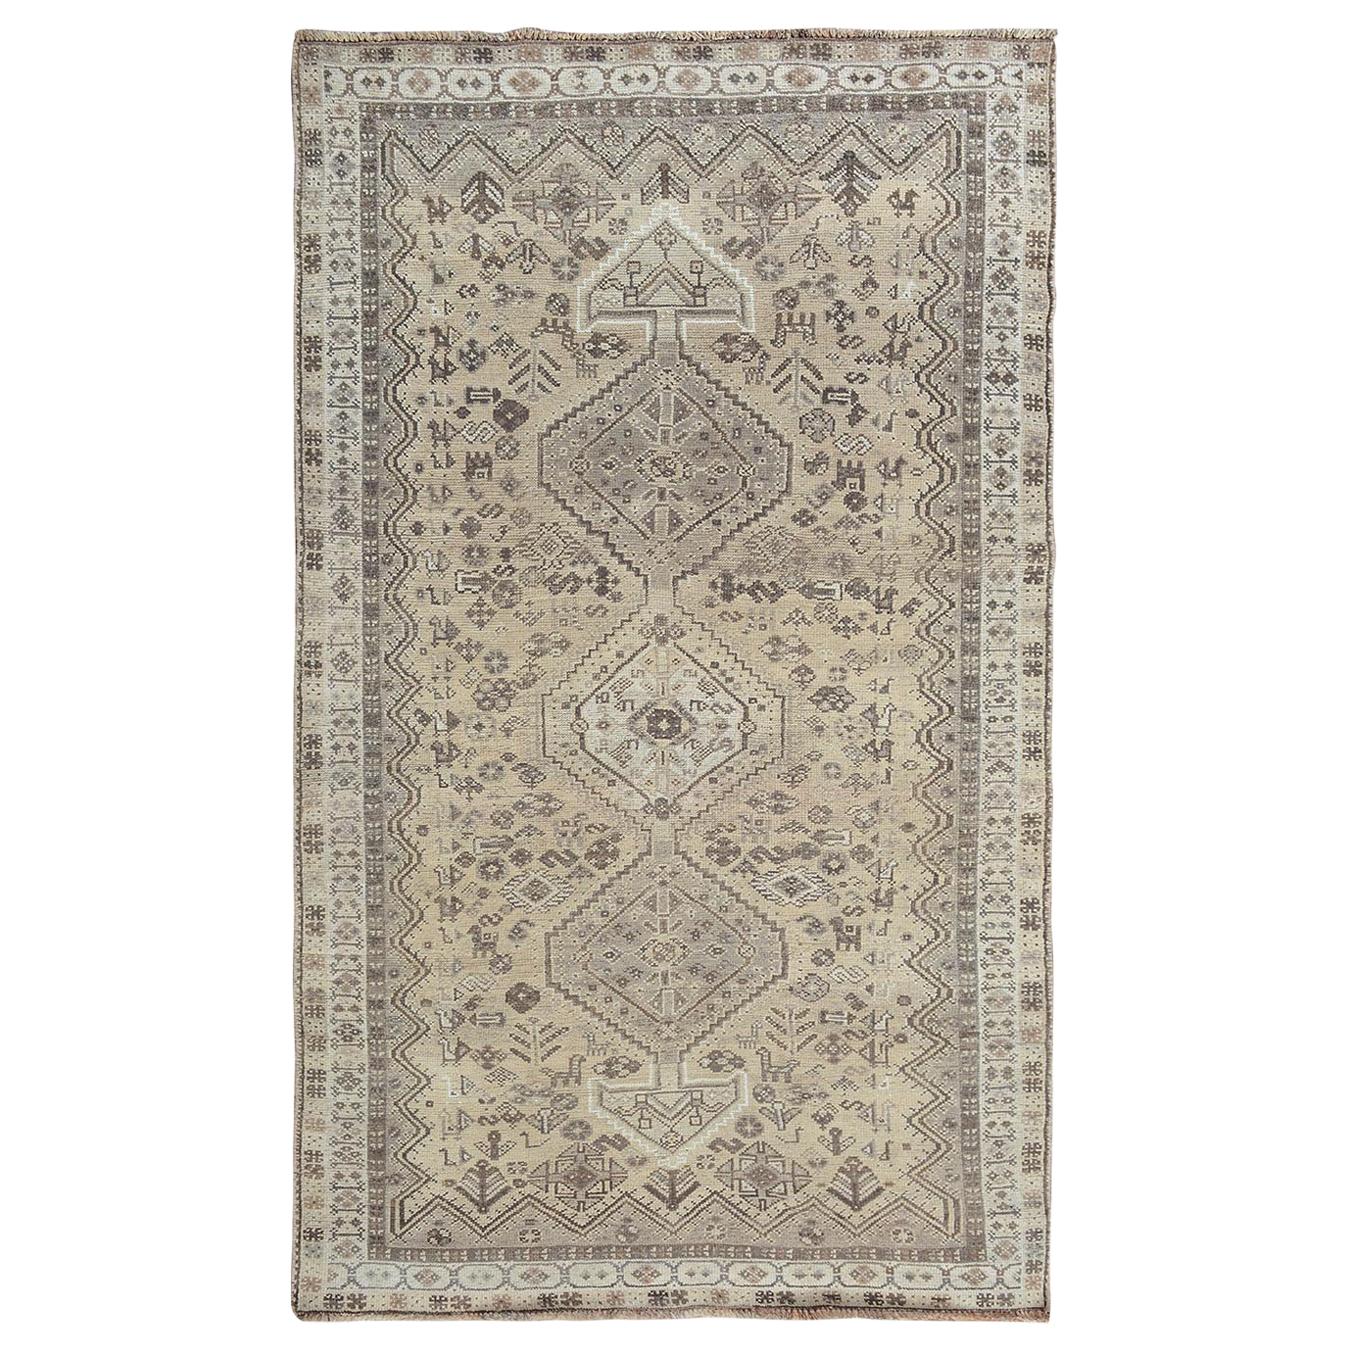 Earth Tone Colors Old and Worn Down Persian Qashqai Pure Wool Hand Knotted Rug